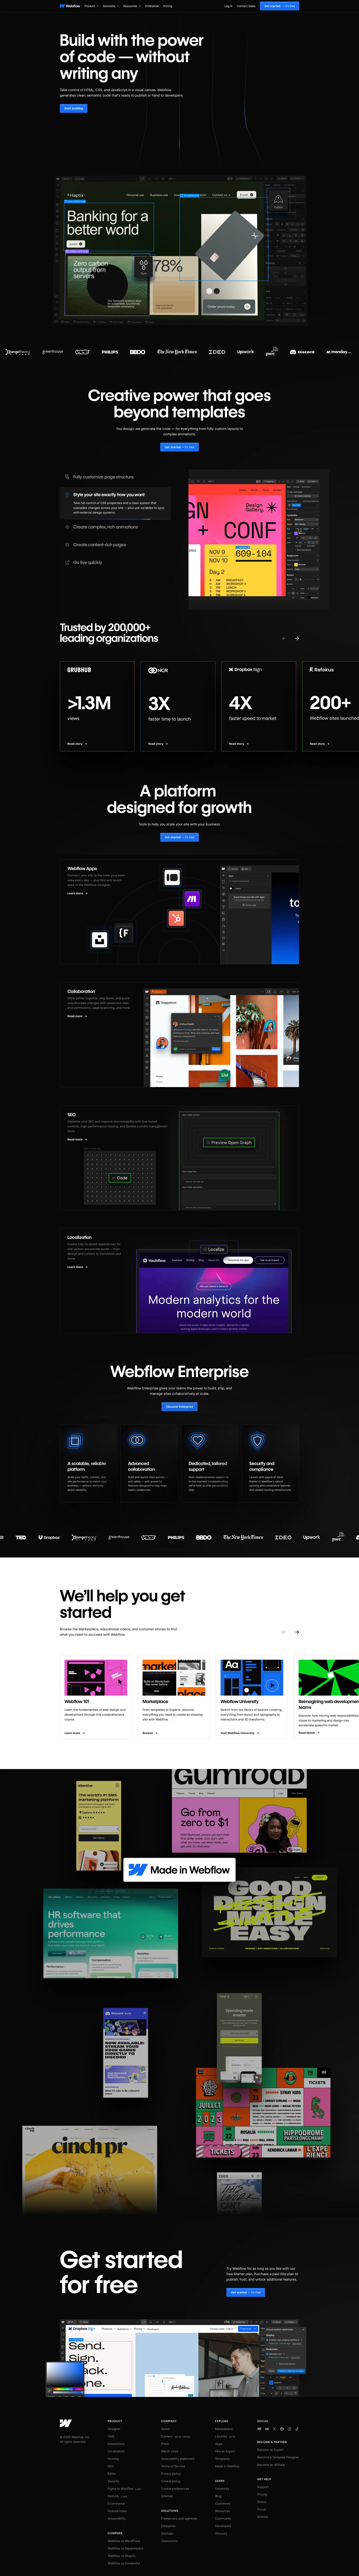 Webflow Landing Page Example: Build with the power of code — without writing any. Take control of HTML, CSS, and JavaScript in a visual canvas. Webflow generates clean, semantic code that’s ready to publish or hand to developers.